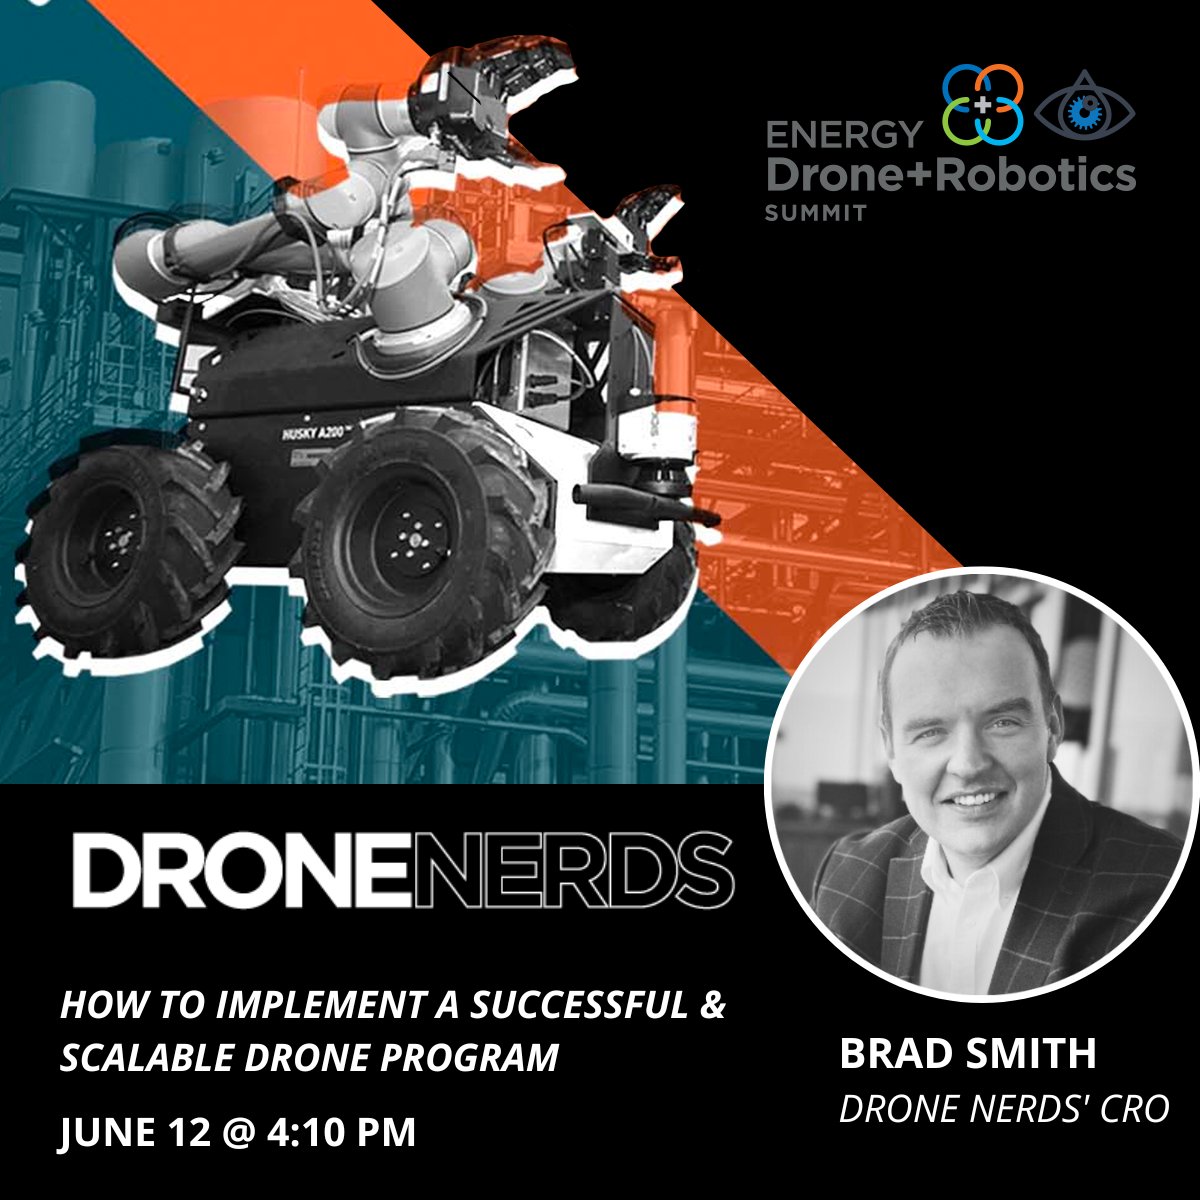 Reminder for all the Houston, TX Drone Nerds! Our CRO Brad Smith will be sharing his knowledge on the successful implementation of Drone Program at #EDRS this weekend, June 12th at 4:10PM!

Get your tickets while you still can with code 'EDRSVIP14' 
hubs.li/Q01S-DSF0